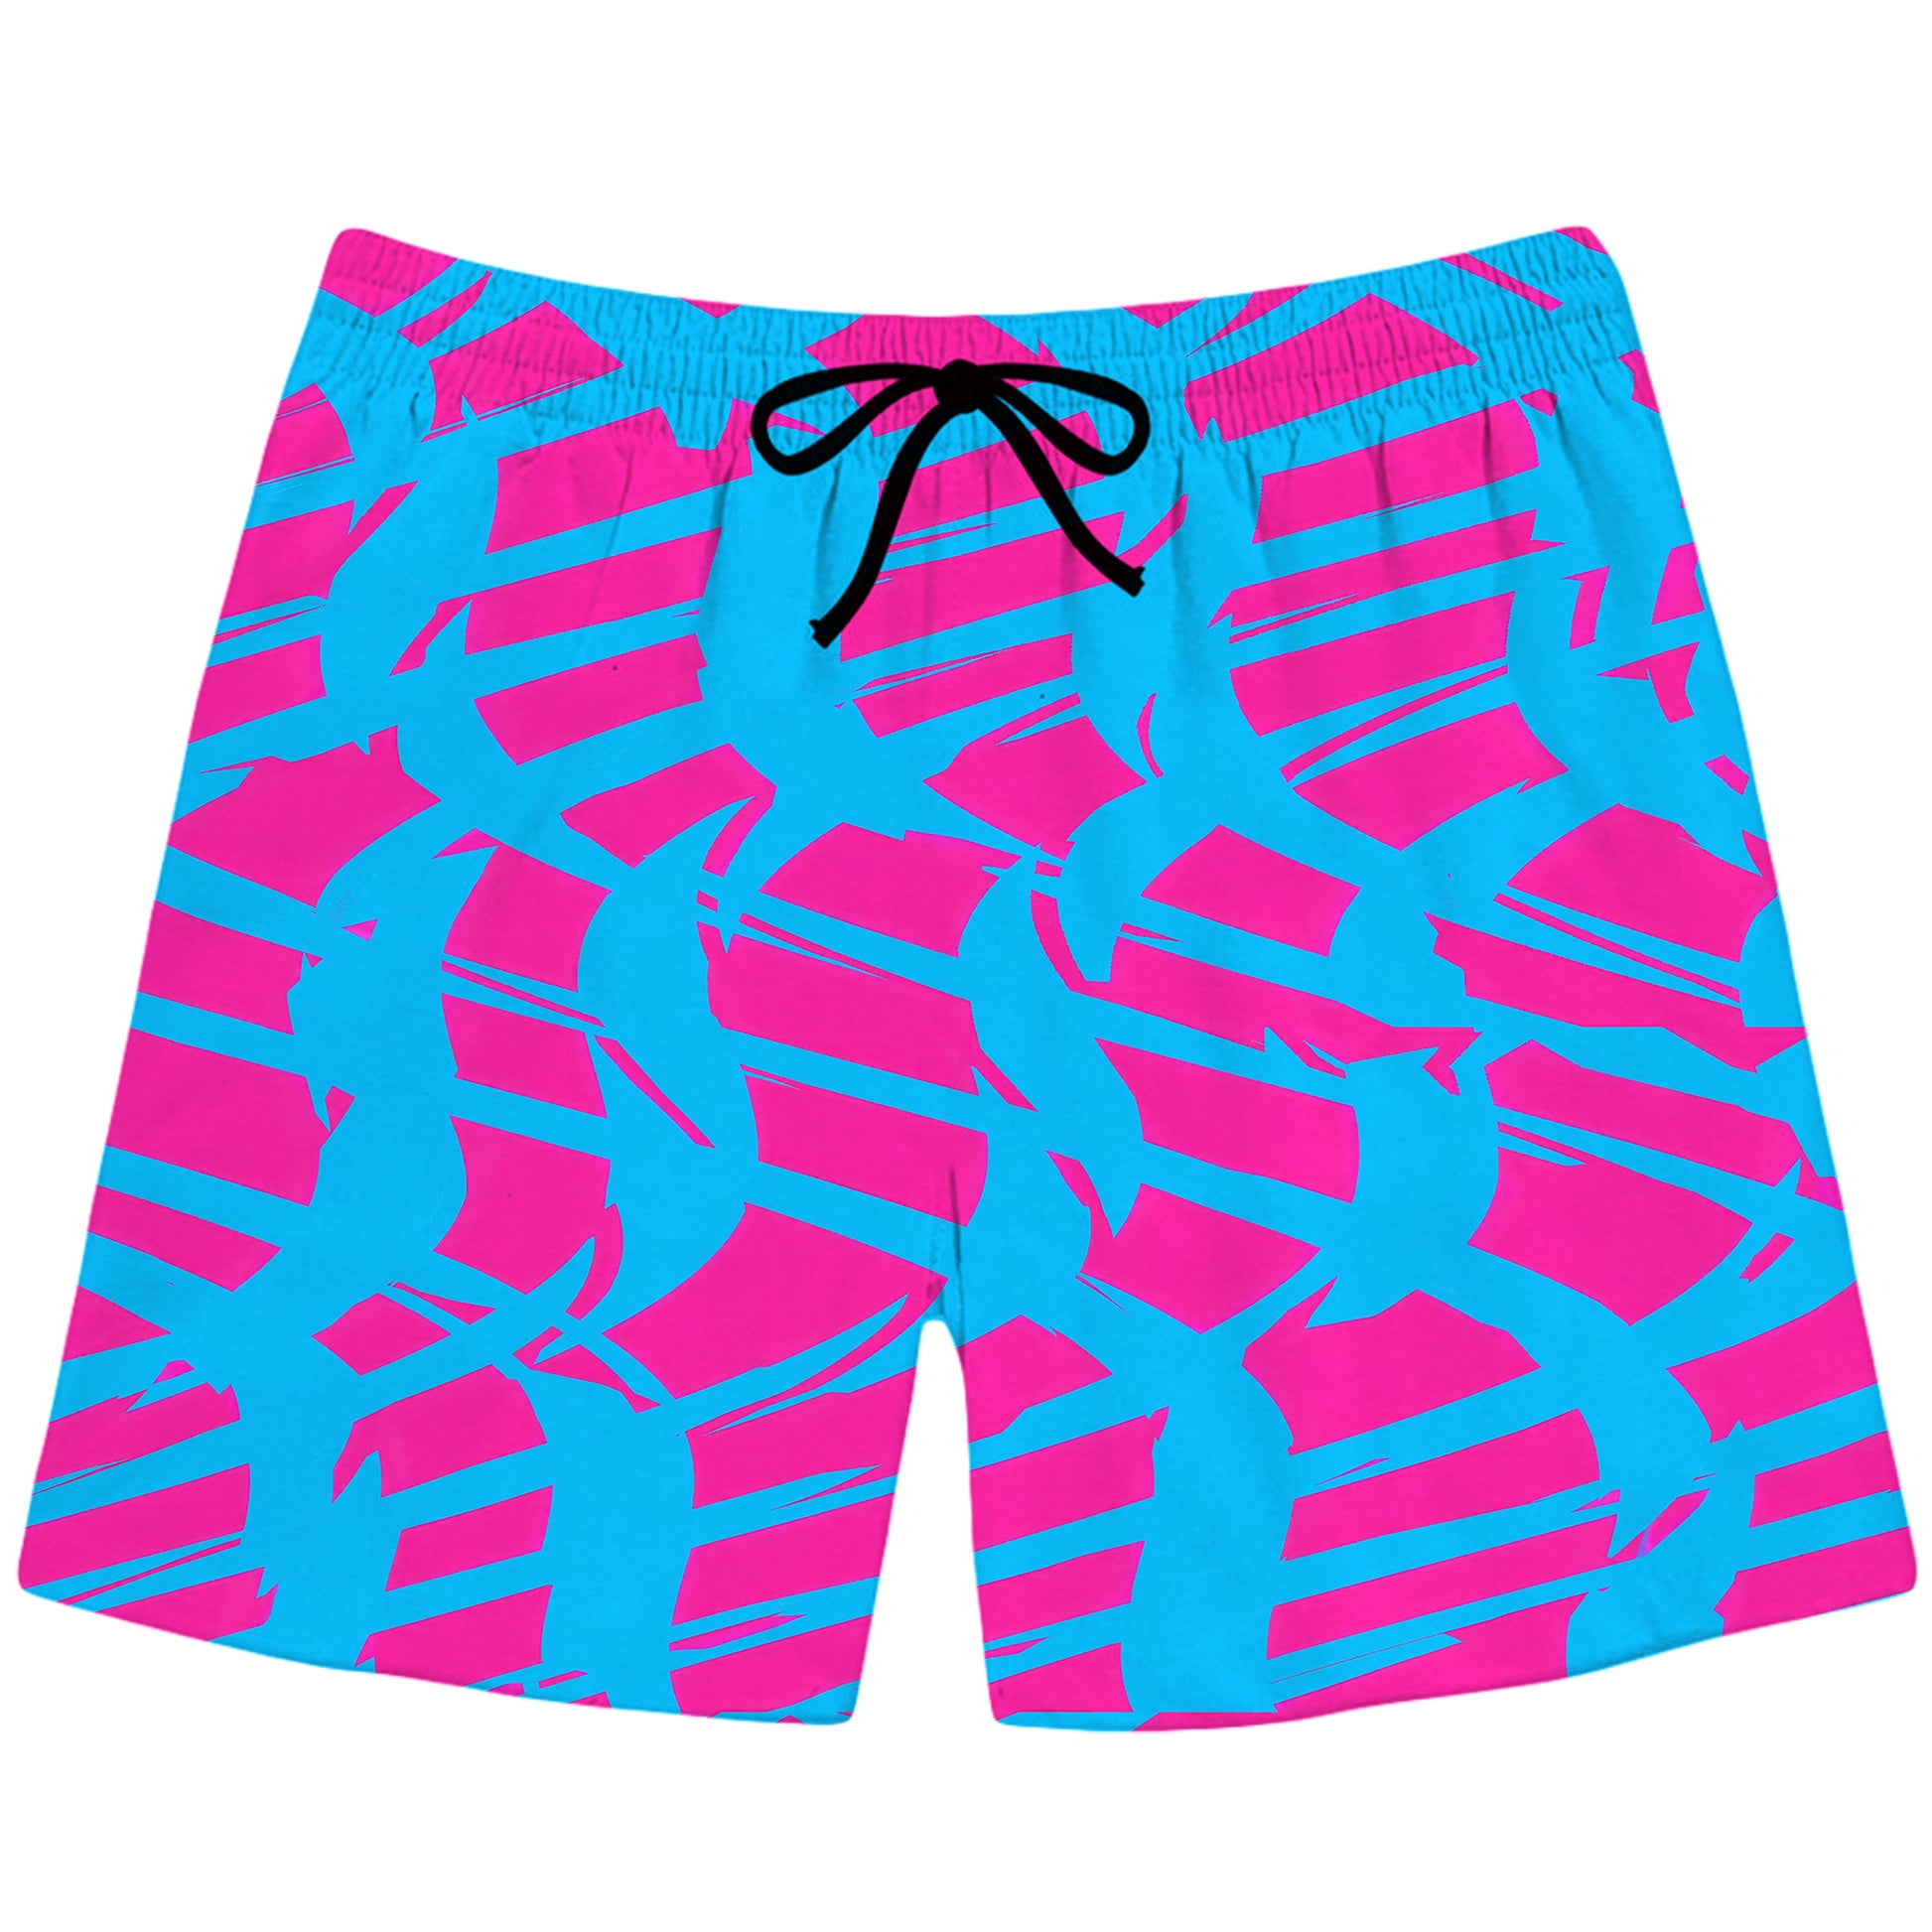 Pink and Blue Squiggly Rave Checkered Swim Trunks, Big Tex Funkadelic, | iEDM